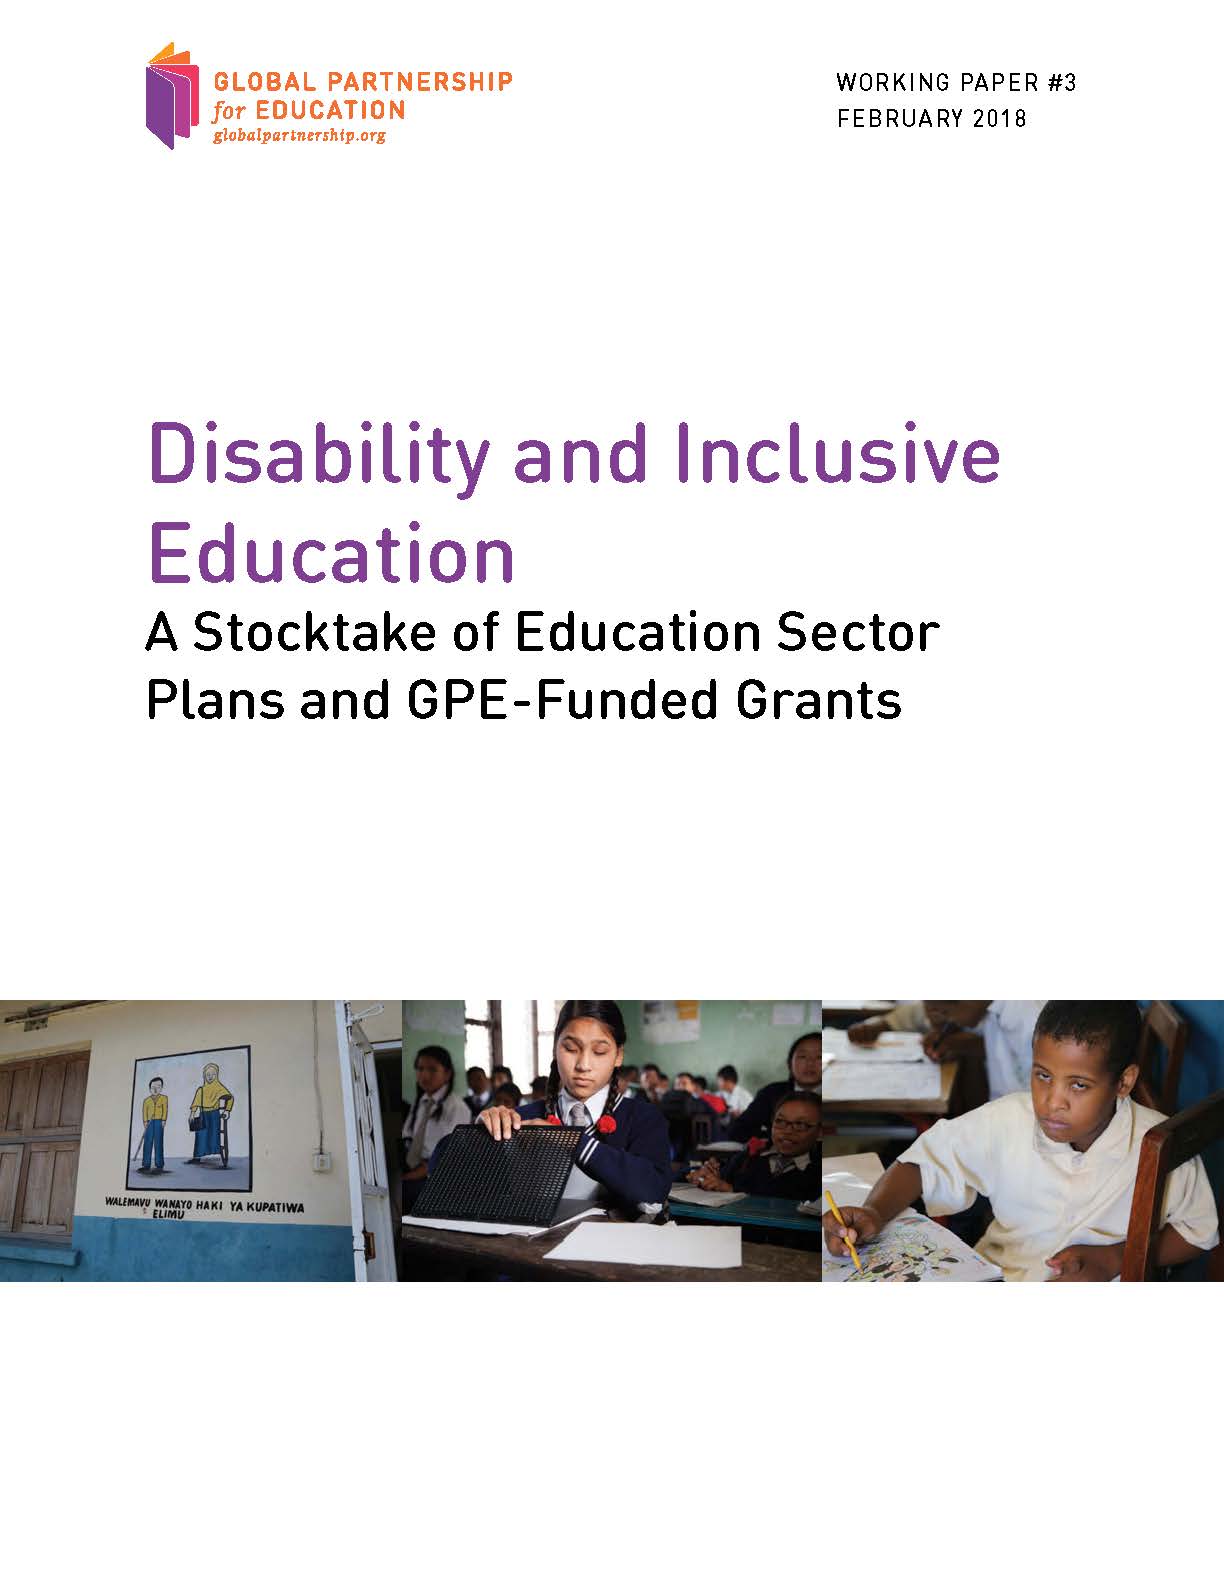 Disability and inclusive education - A stocktake of education sector plans and GPE-funded grants